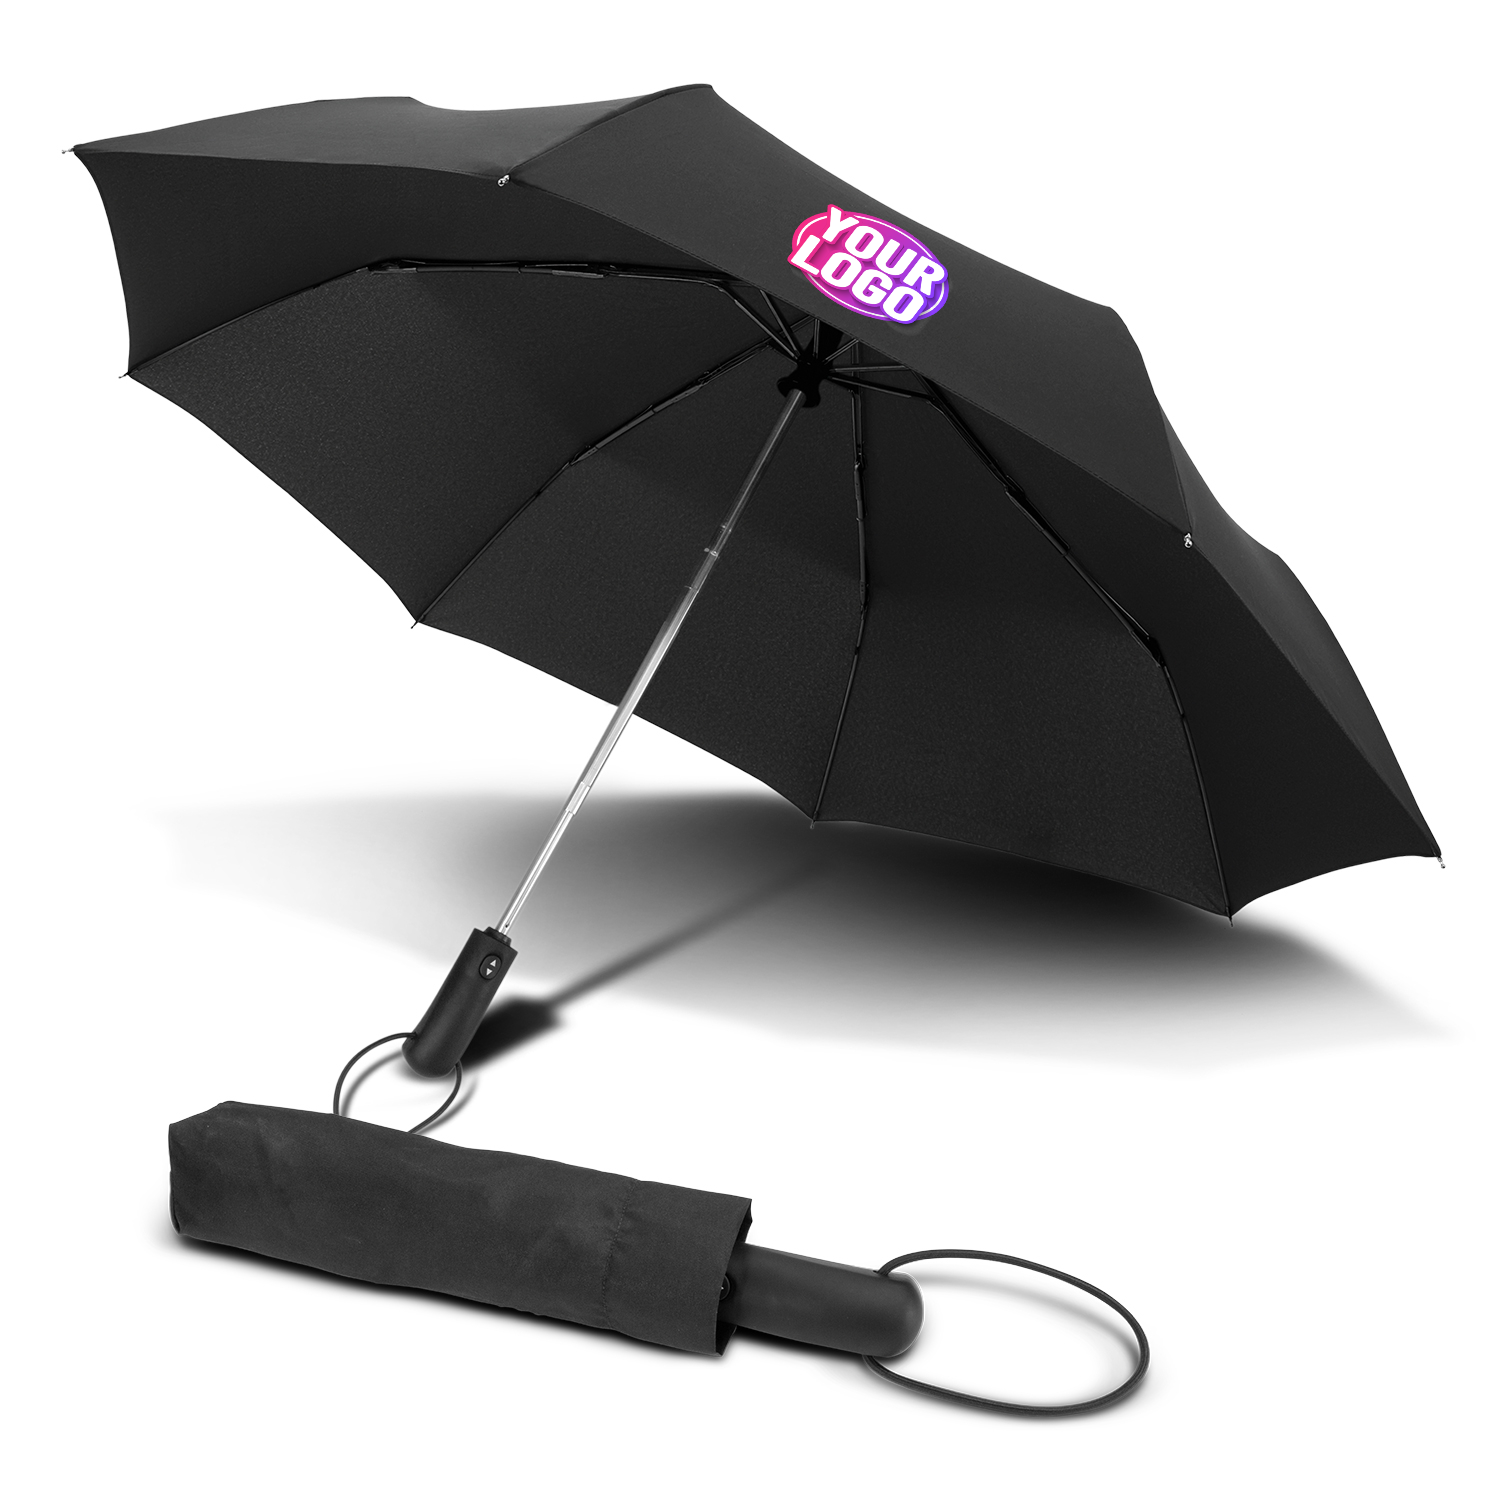 CUSTOM BRANDED - STORM PROOF ULTIMATE COMPACT®️  Premium Collapsible Umbrella With Heavy Duty Steel Frame  - SMART Automatic Open & Close Push Button Technology